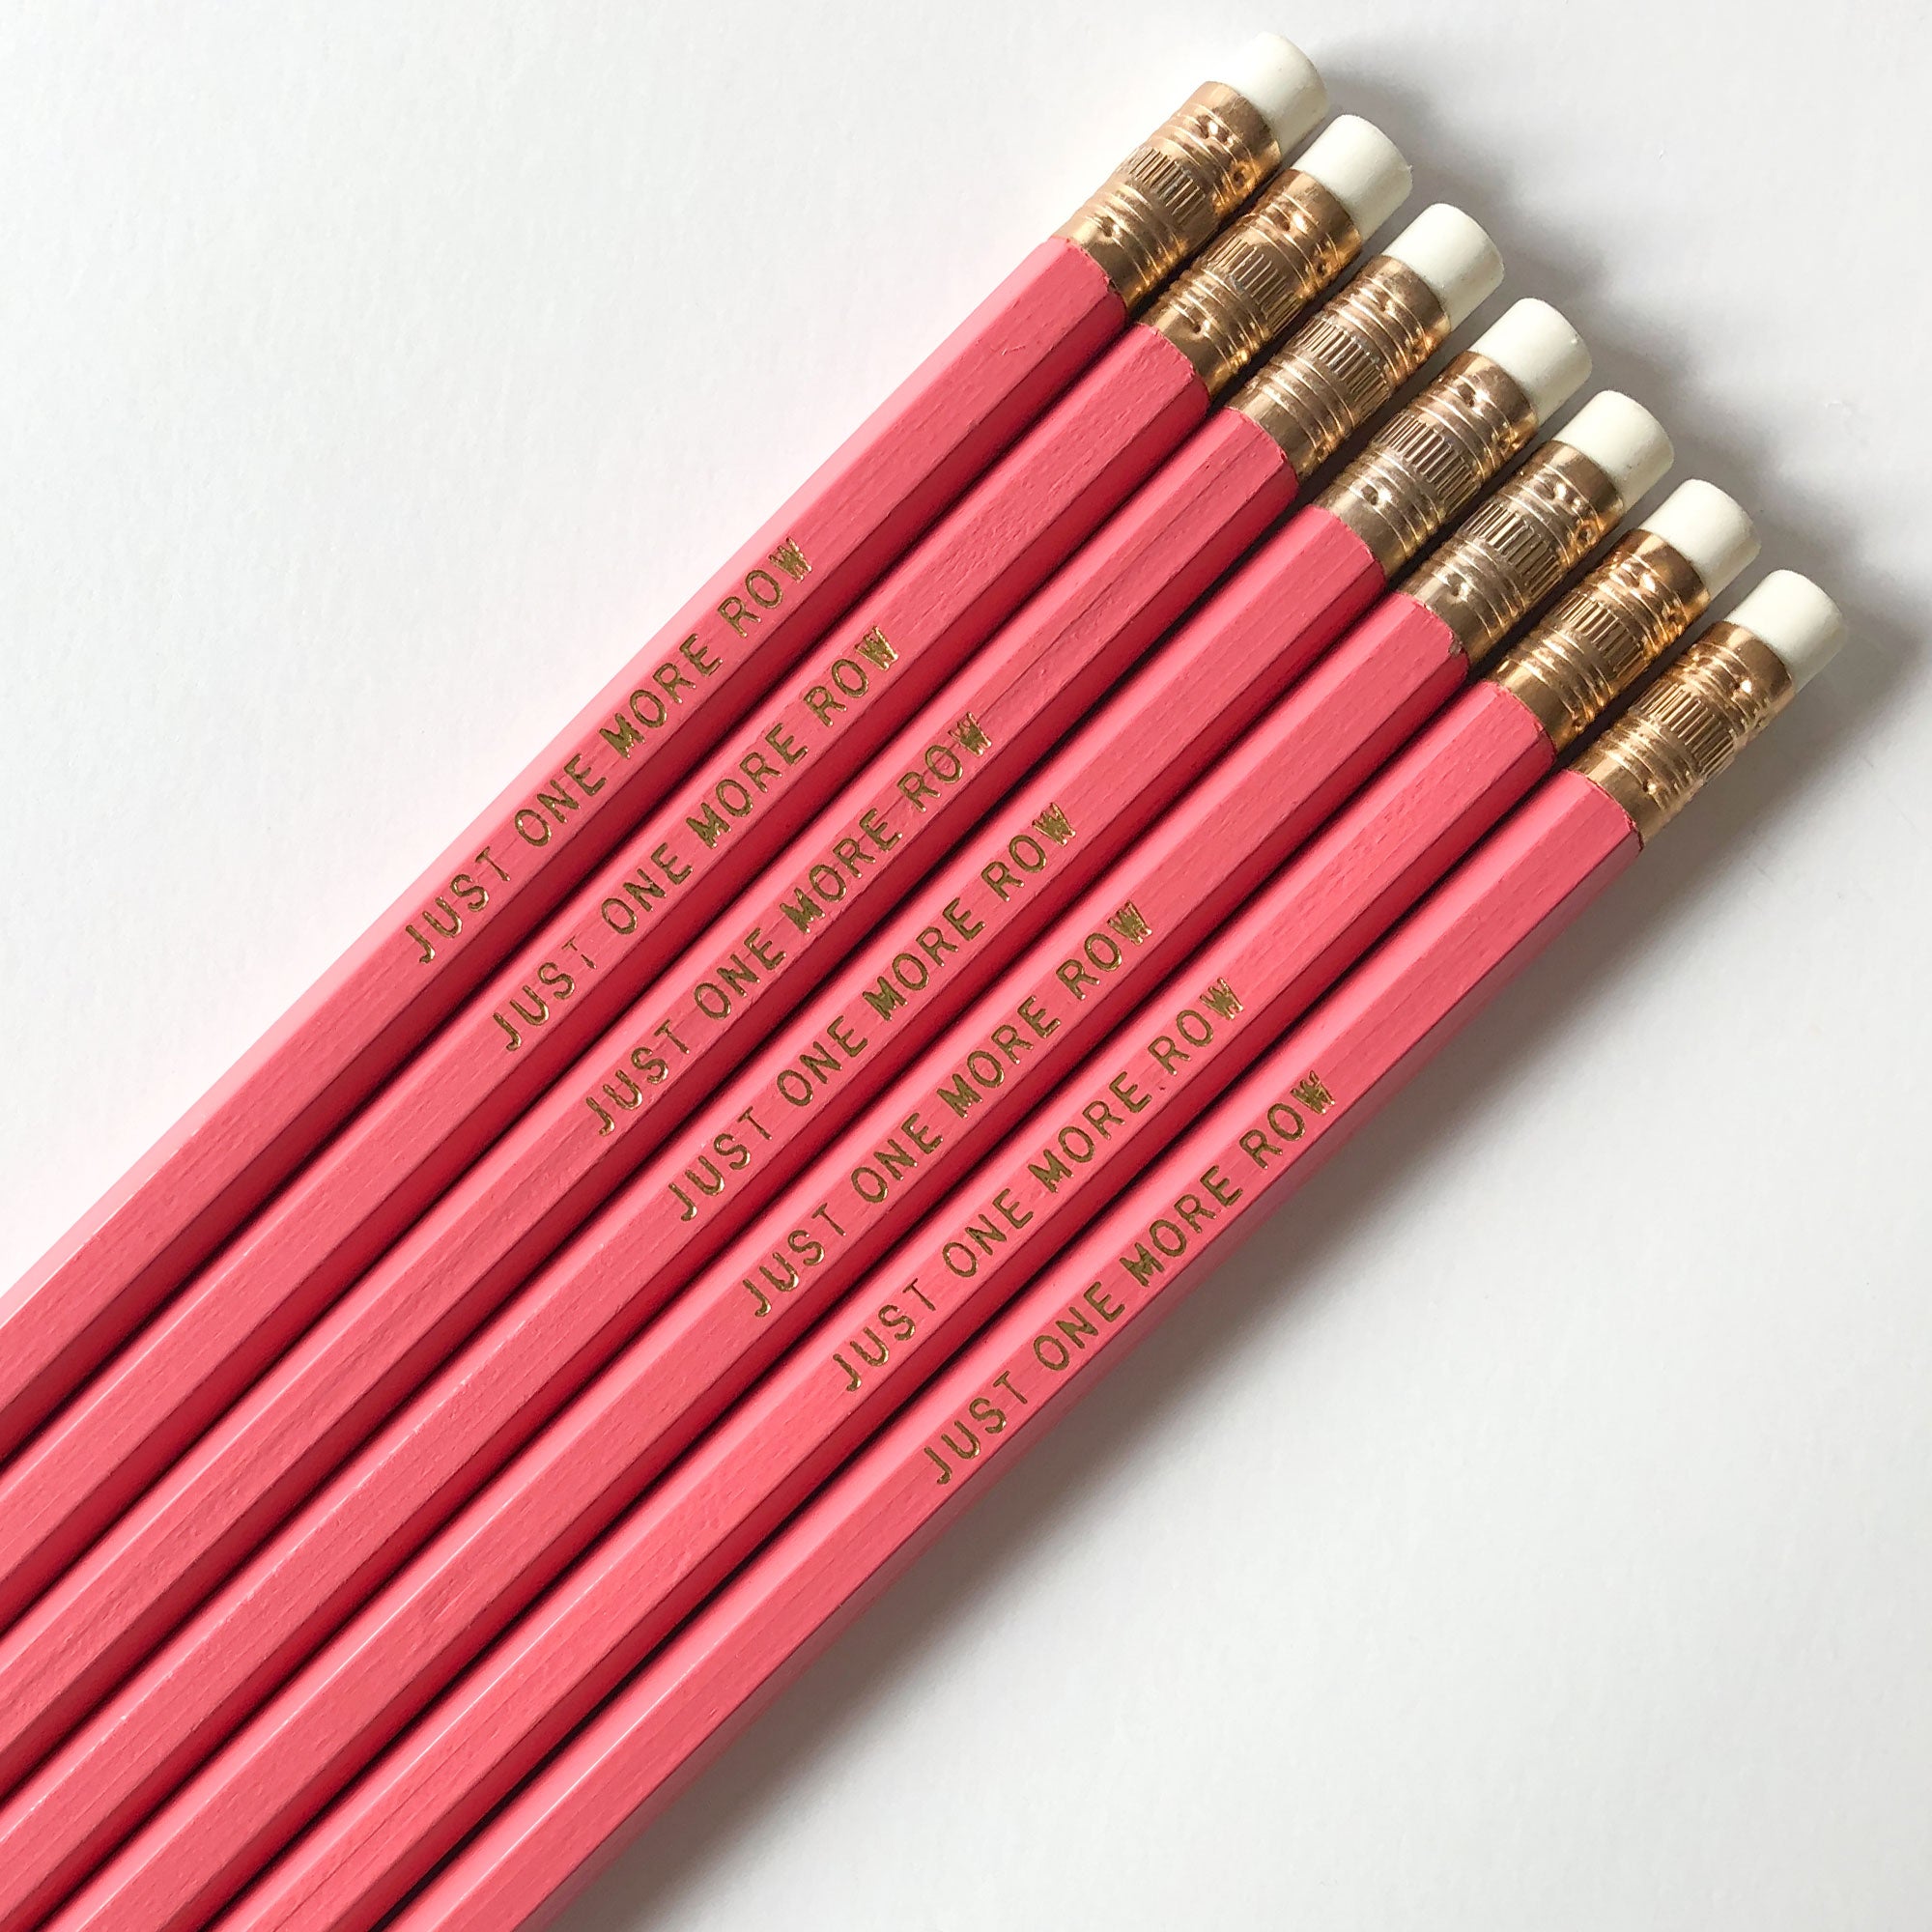 Bubblegum Pink set of "Just one more row" pencils